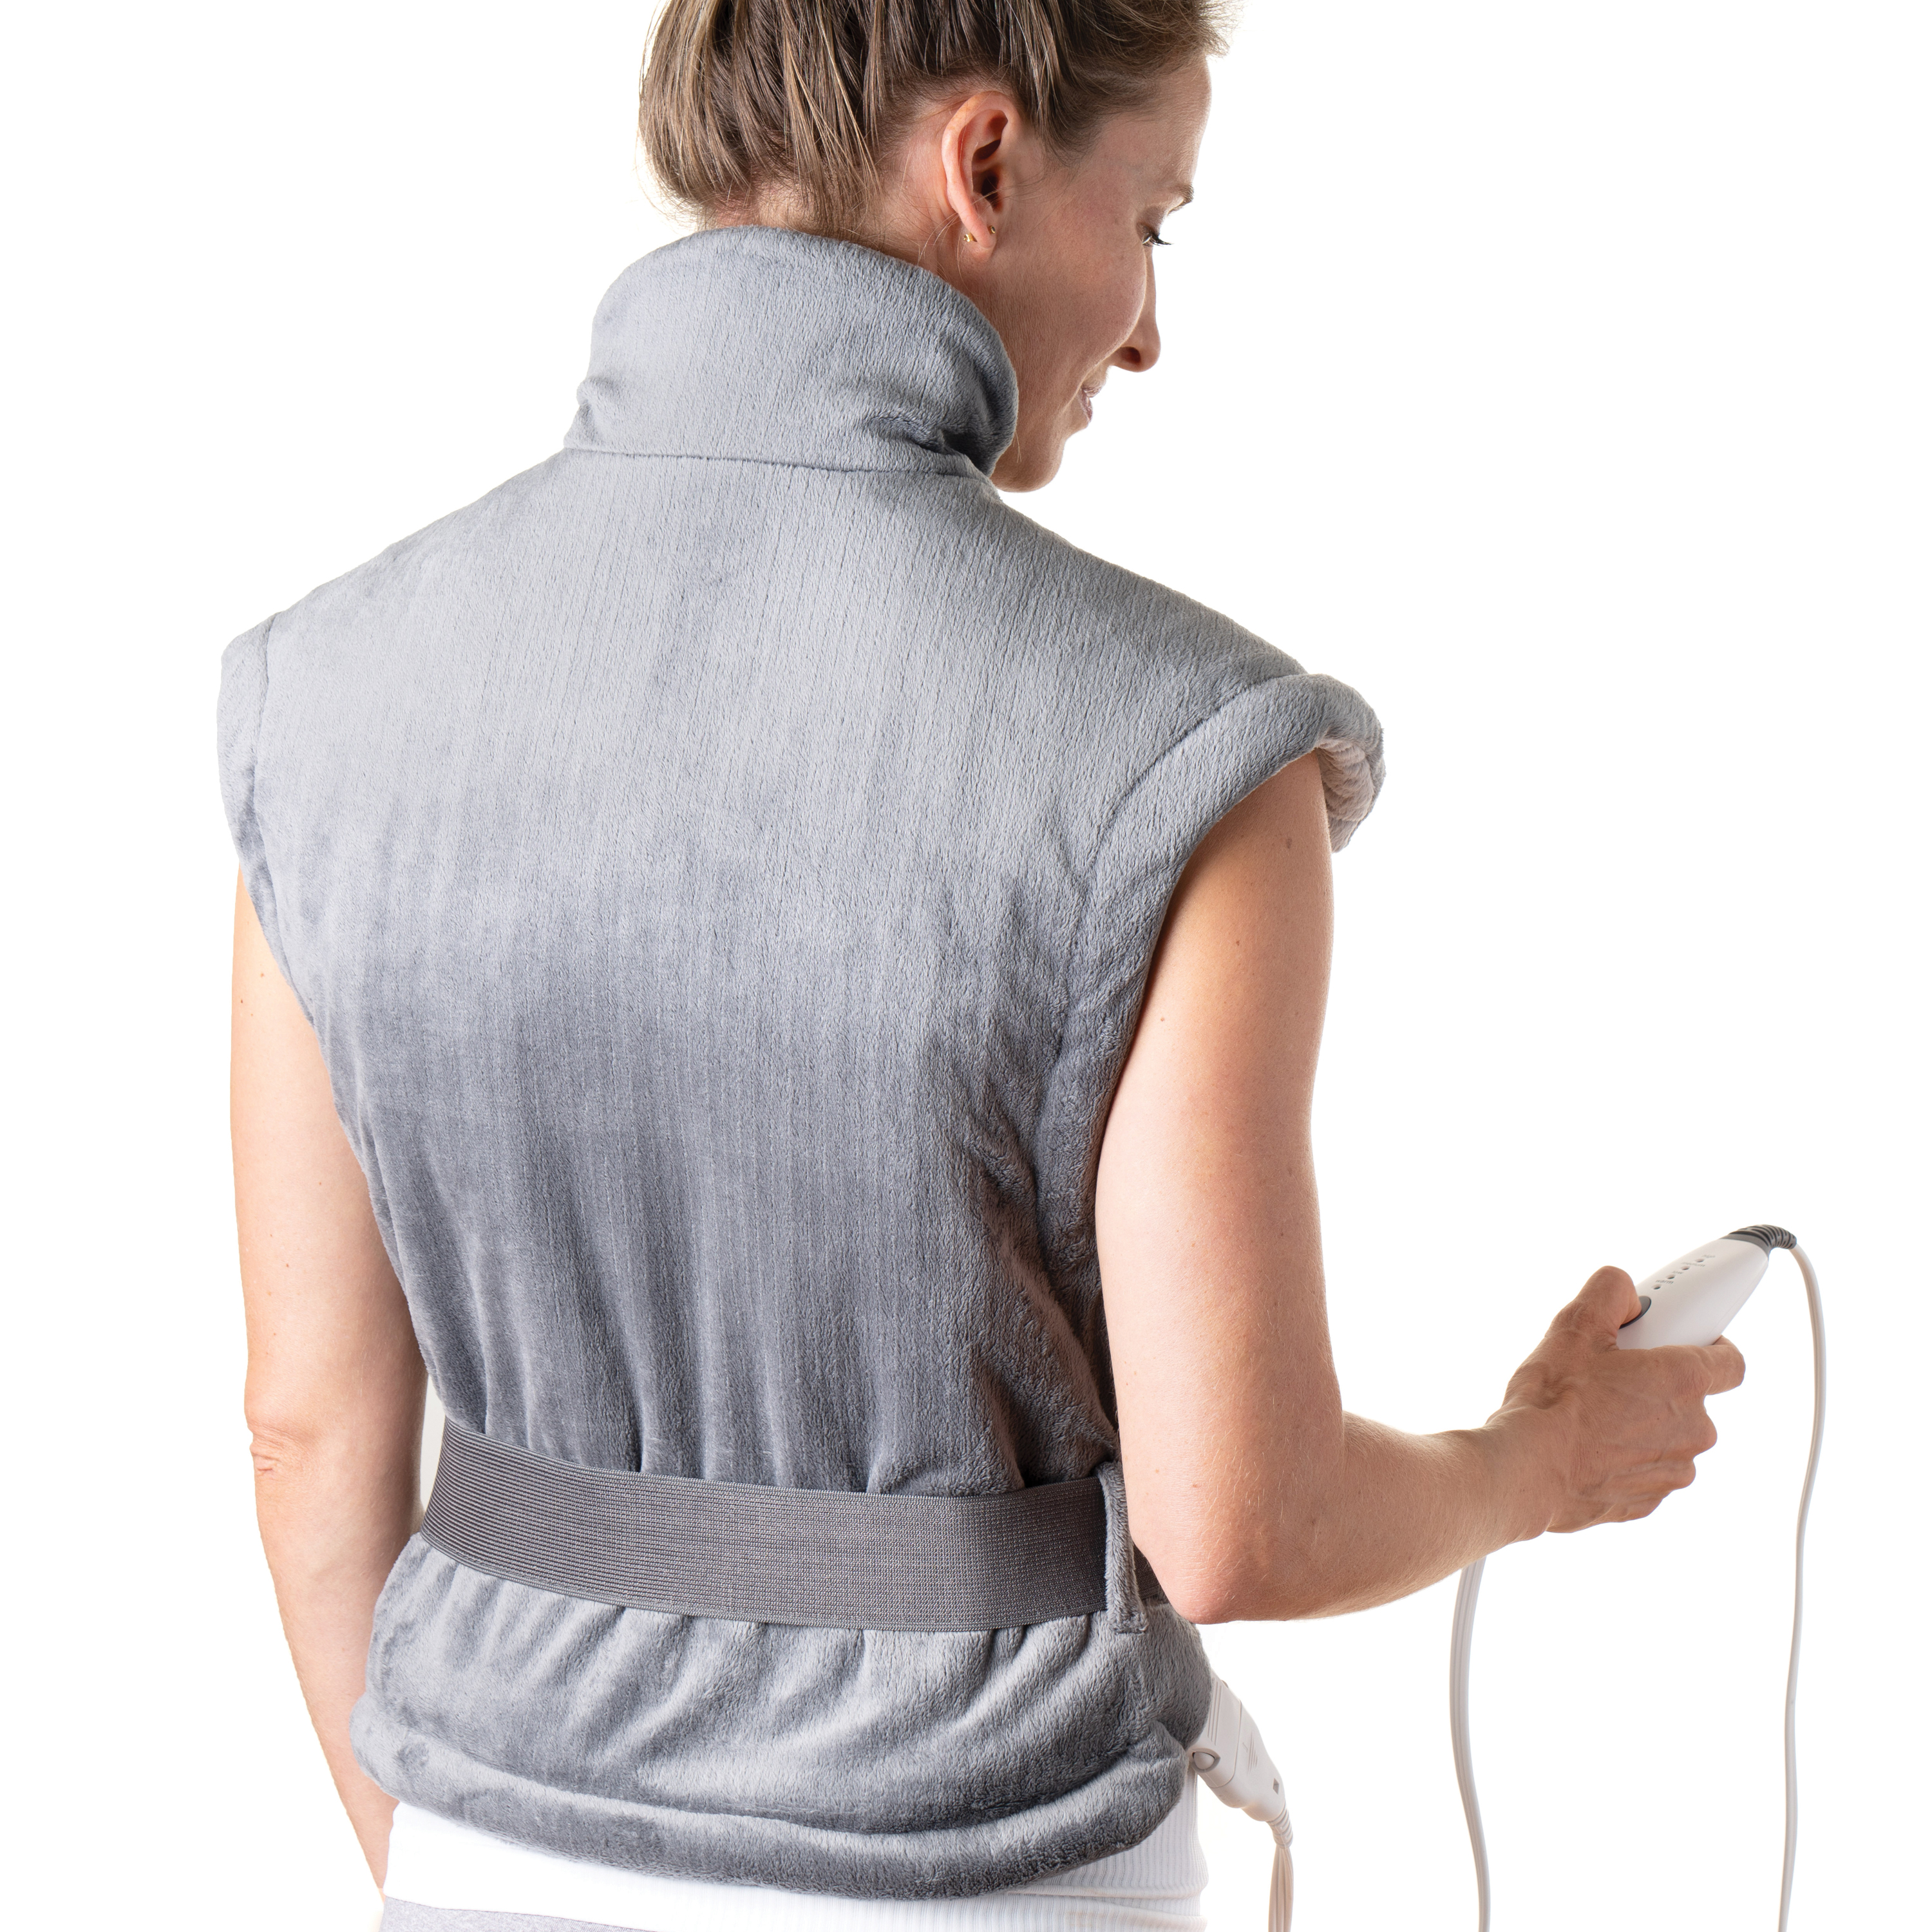 Pure Enrichment PureRelief XL Heating Pad for Back & Neck - Heat Therapy with 4 Heat Settings and Auto Shut-Off (Gray) - image 3 of 5